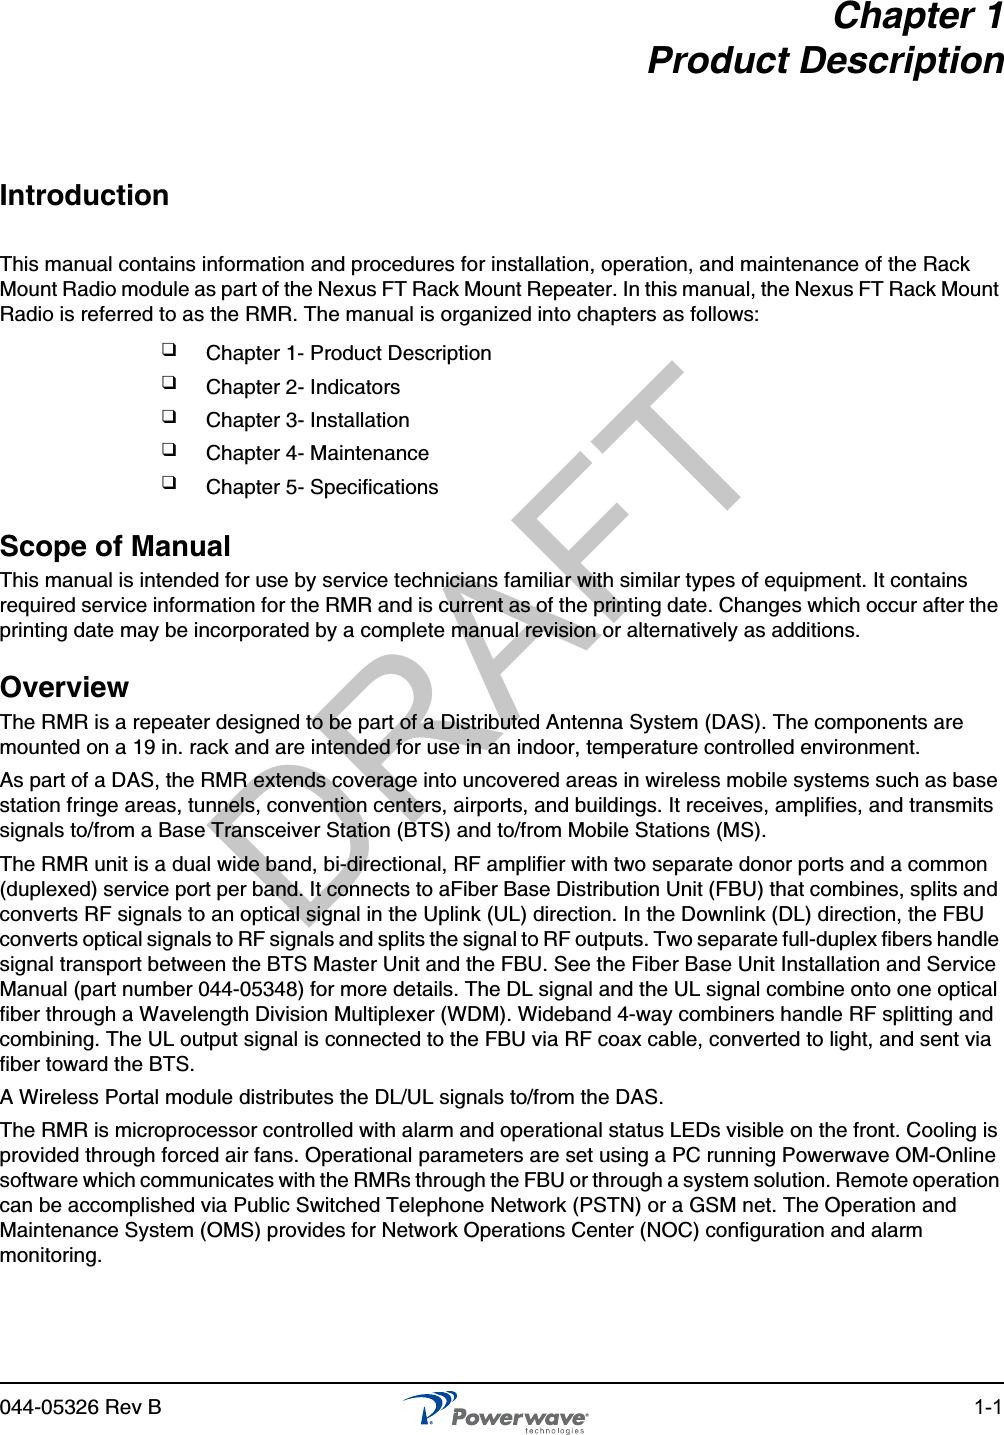 044-05326 Rev B 1-1Chapter 1Product DescriptionIntroductionThis manual contains information and procedures for installation, operation, and maintenance of the Rack Mount Radio module as part of the Nexus FT Rack Mount Repeater. In this manual, the Nexus FT Rack Mount Radio is referred to as the RMR. The manual is organized into chapters as follows:Scope of ManualThis manual is intended for use by service technicians familiar with similar types of equipment. It contains required service information for the RMR and is current as of the printing date. Changes which occur after the printing date may be incorporated by a complete manual revision or alternatively as additions.OverviewThe RMR is a repeater designed to be part of a Distributed Antenna System (DAS). The components are mounted on a 19 in. rack and are intended for use in an indoor, temperature controlled environment.As part of a DAS, the RMR extends coverage into uncovered areas in wireless mobile systems such as base station fringe areas, tunnels, convention centers, airports, and buildings. It receives, amplifies, and transmits signals to/from a Base Transceiver Station (BTS) and to/from Mobile Stations (MS).The RMR unit is a dual wide band, bi-directional, RF amplifier with two separate donor ports and a common (duplexed) service port per band. It connects to aFiber Base Distribution Unit (FBU) that combines, splits and converts RF signals to an optical signal in the Uplink (UL) direction. In the Downlink (DL) direction, the FBU converts optical signals to RF signals and splits the signal to RF outputs. Two separate full-duplex fibers handle signal transport between the BTS Master Unit and the FBU. See the Fiber Base Unit Installation and Service Manual (part number 044-05348) for more details. The DL signal and the UL signal combine onto one optical fiber through a Wavelength Division Multiplexer (WDM). Wideband 4-way combiners handle RF splitting and combining. The UL output signal is connected to the FBU via RF coax cable, converted to light, and sent via fiber toward the BTS.A Wireless Portal module distributes the DL/UL signals to/from the DAS. The RMR is microprocessor controlled with alarm and operational status LEDs visible on the front. Cooling is provided through forced air fans. Operational parameters are set using a PC running Powerwave OM-Online software which communicates with the RMRs through the FBU or through a system solution. Remote operation can be accomplished via Public Switched Telephone Network (PSTN) or a GSM net. The Operation and Maintenance System (OMS) provides for Network Operations Center (NOC) configuration and alarm monitoring.❑Chapter 1- Product Description❑Chapter 2- Indicators❑Chapter 3- Installation❑Chapter 4- Maintenance❑Chapter 5- SpecificationsDRAFT